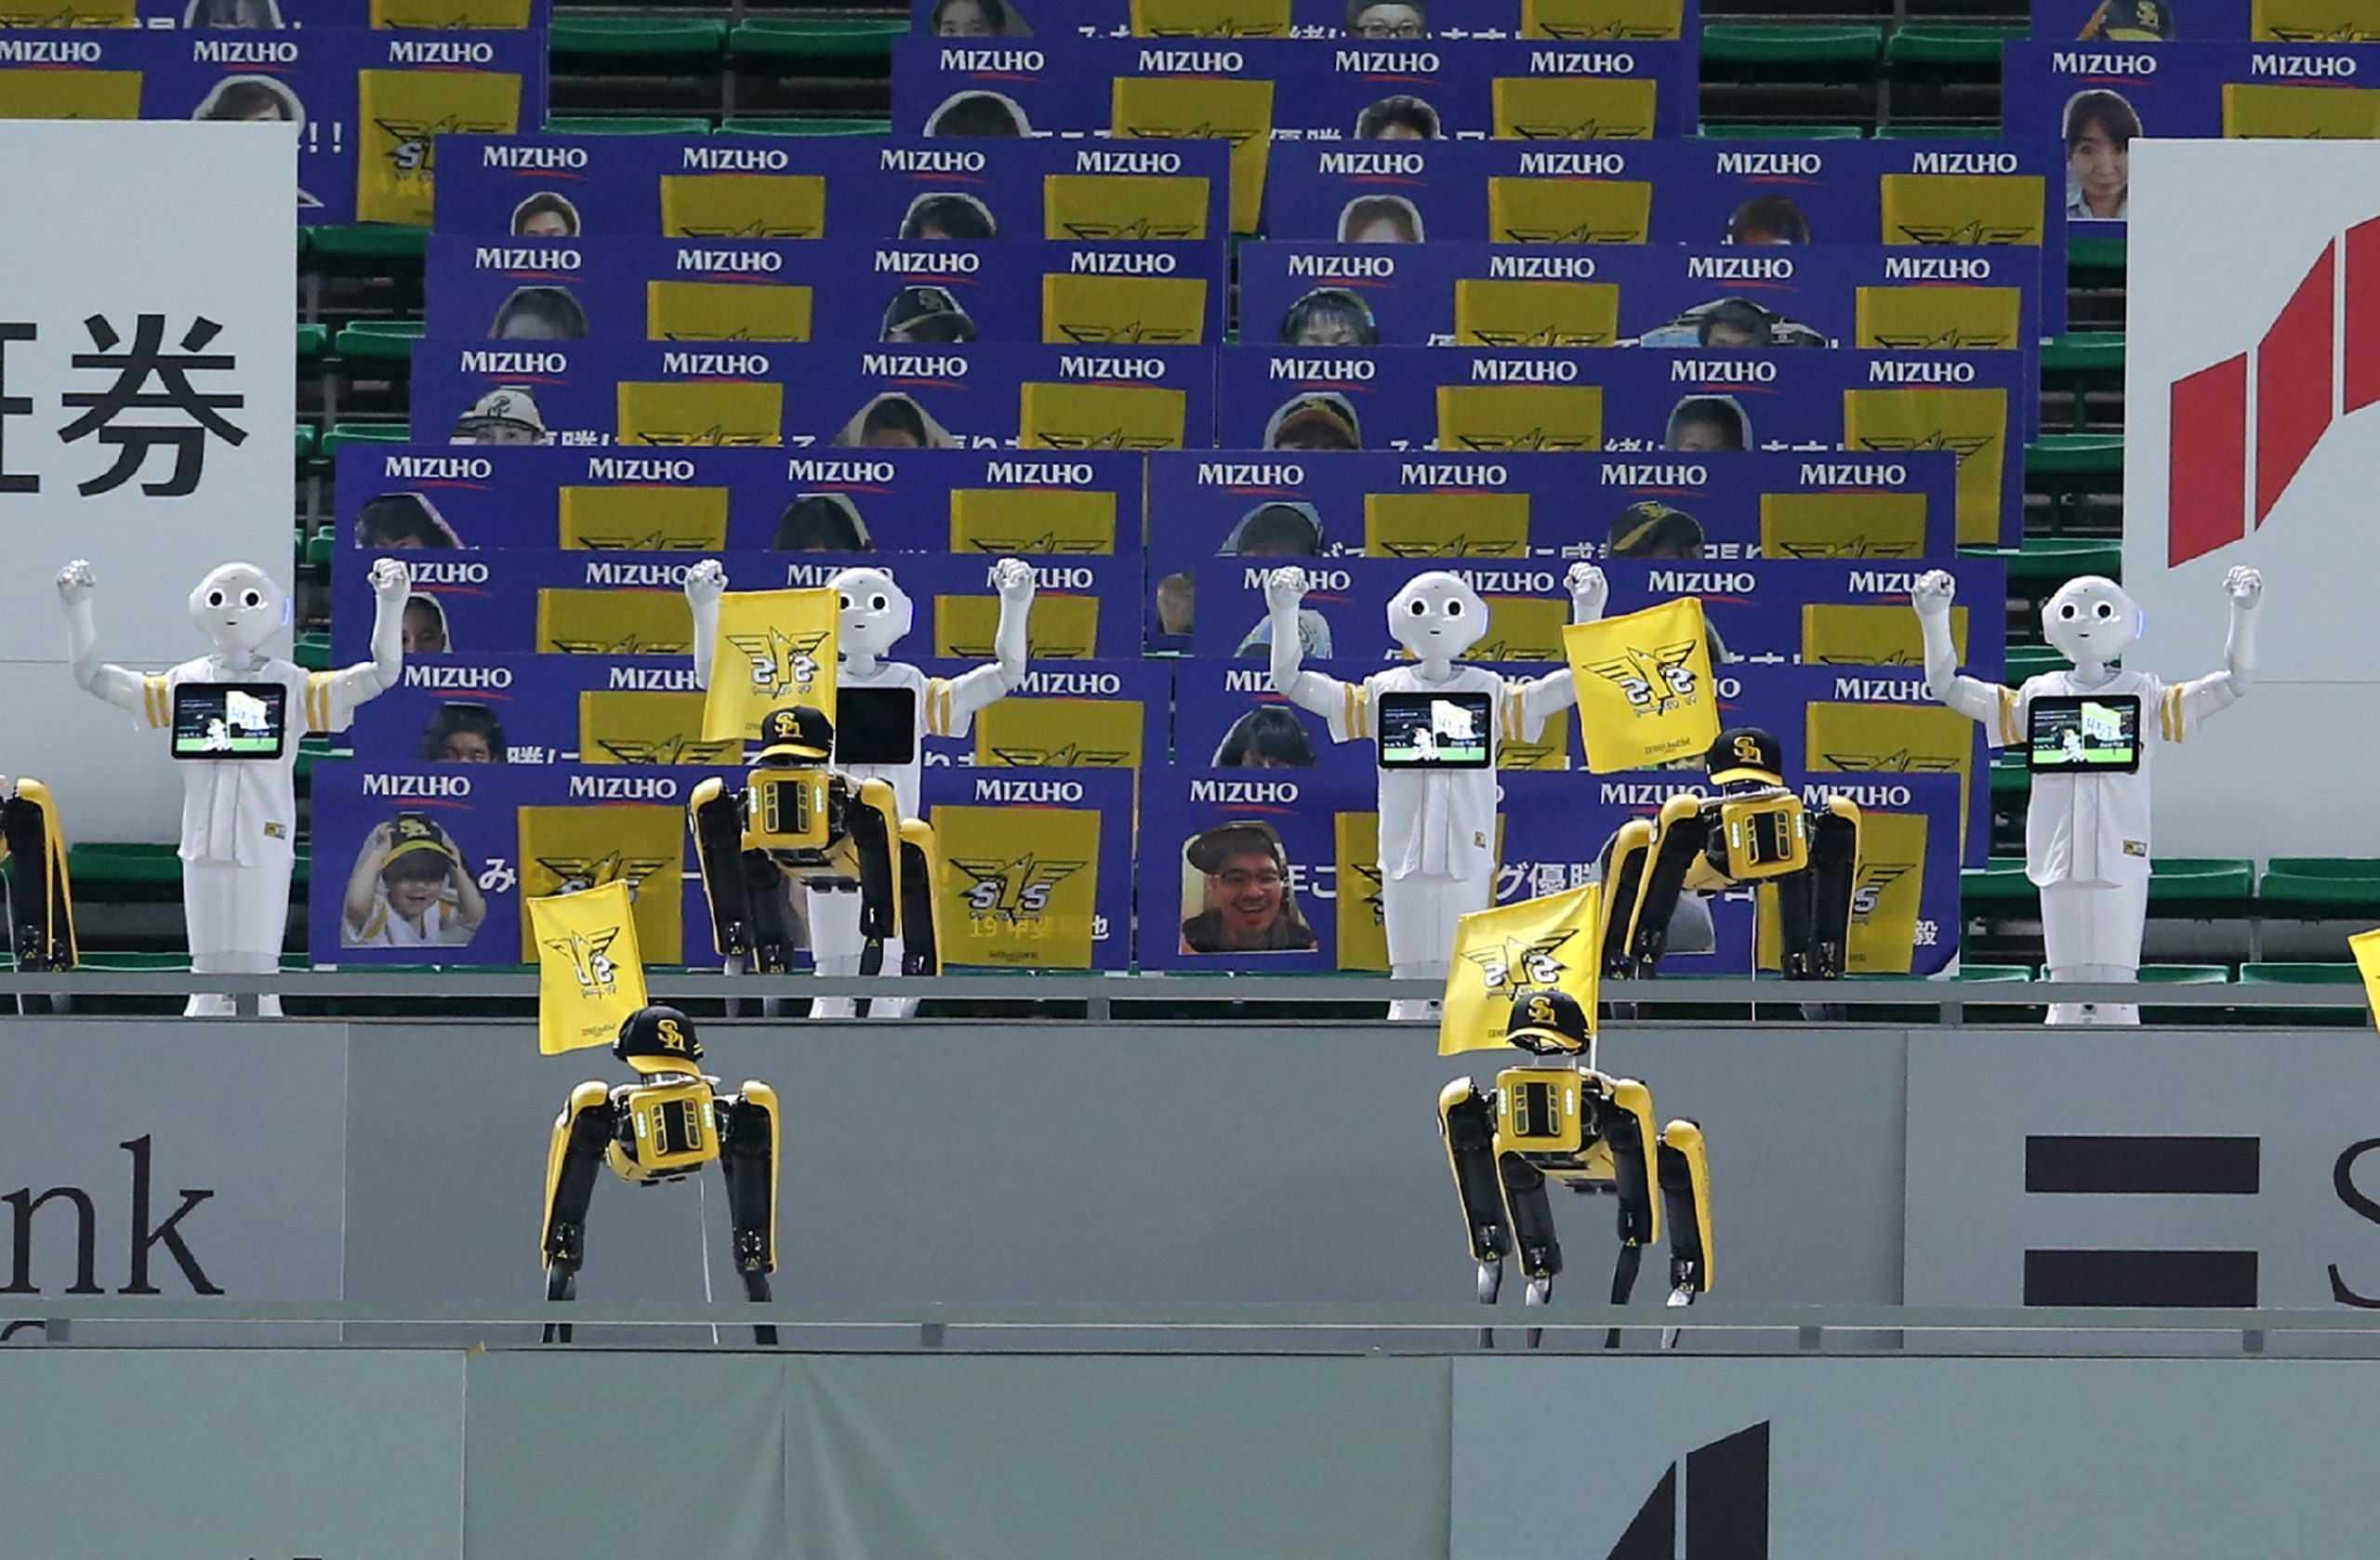 SoftBank Corp's humanoid robots Pepper (white) and Boston Dynamics' robots SPOT (yellow) dance and sing before the Nippon Professional Baseball league match between SoftBank Hawks and Rakuten Golden Eagles in Fukuoka on July 10, 2020. (Photo: STR/JIJI press/AFP, Getty Images)